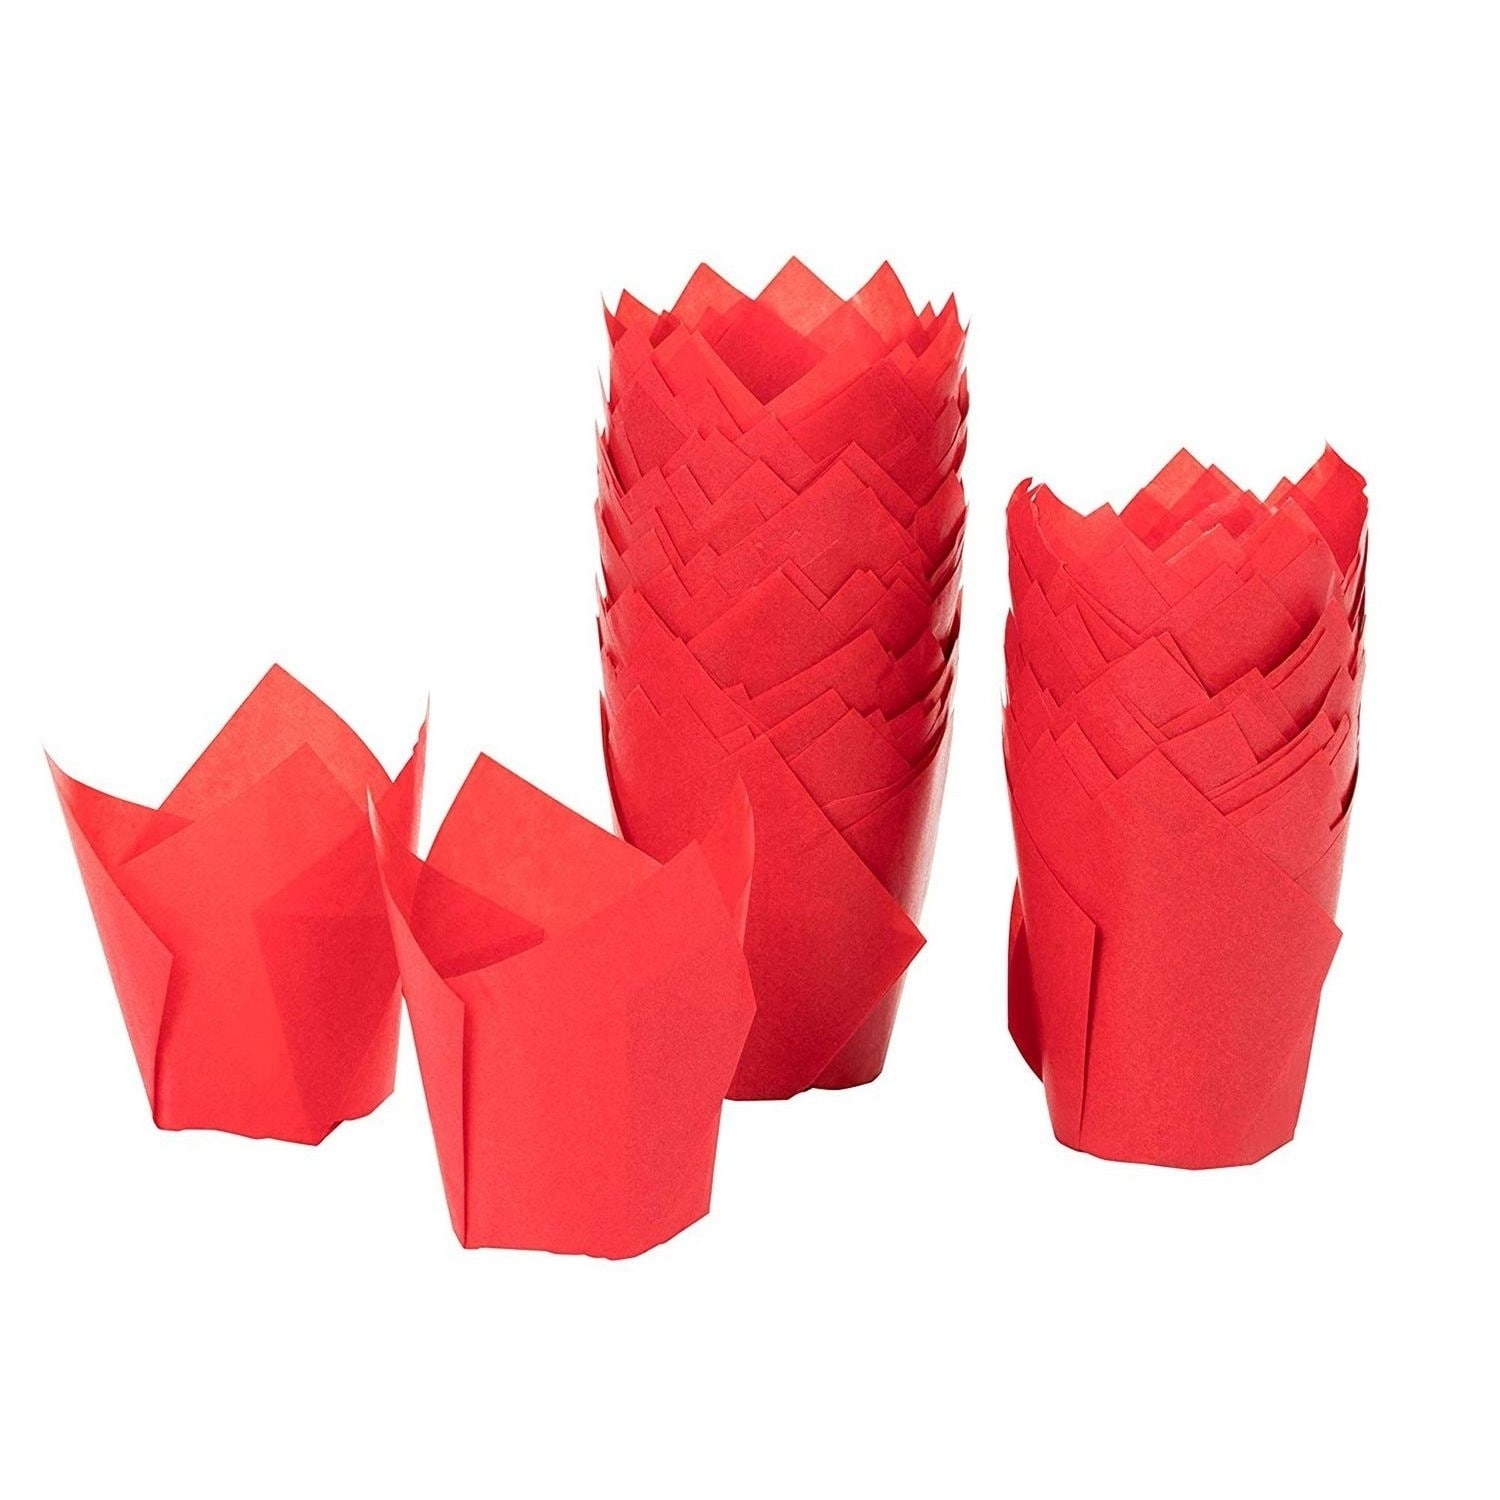 https://ak1.ostkcdn.com/images/products/29792506/100-Tulip-Cupcake-Liners-Medium-Baking-Cups-Muffin-Wrappers-for-Bakeries-Red-fe65261d-dc36-402e-932f-a5adca797689.jpg